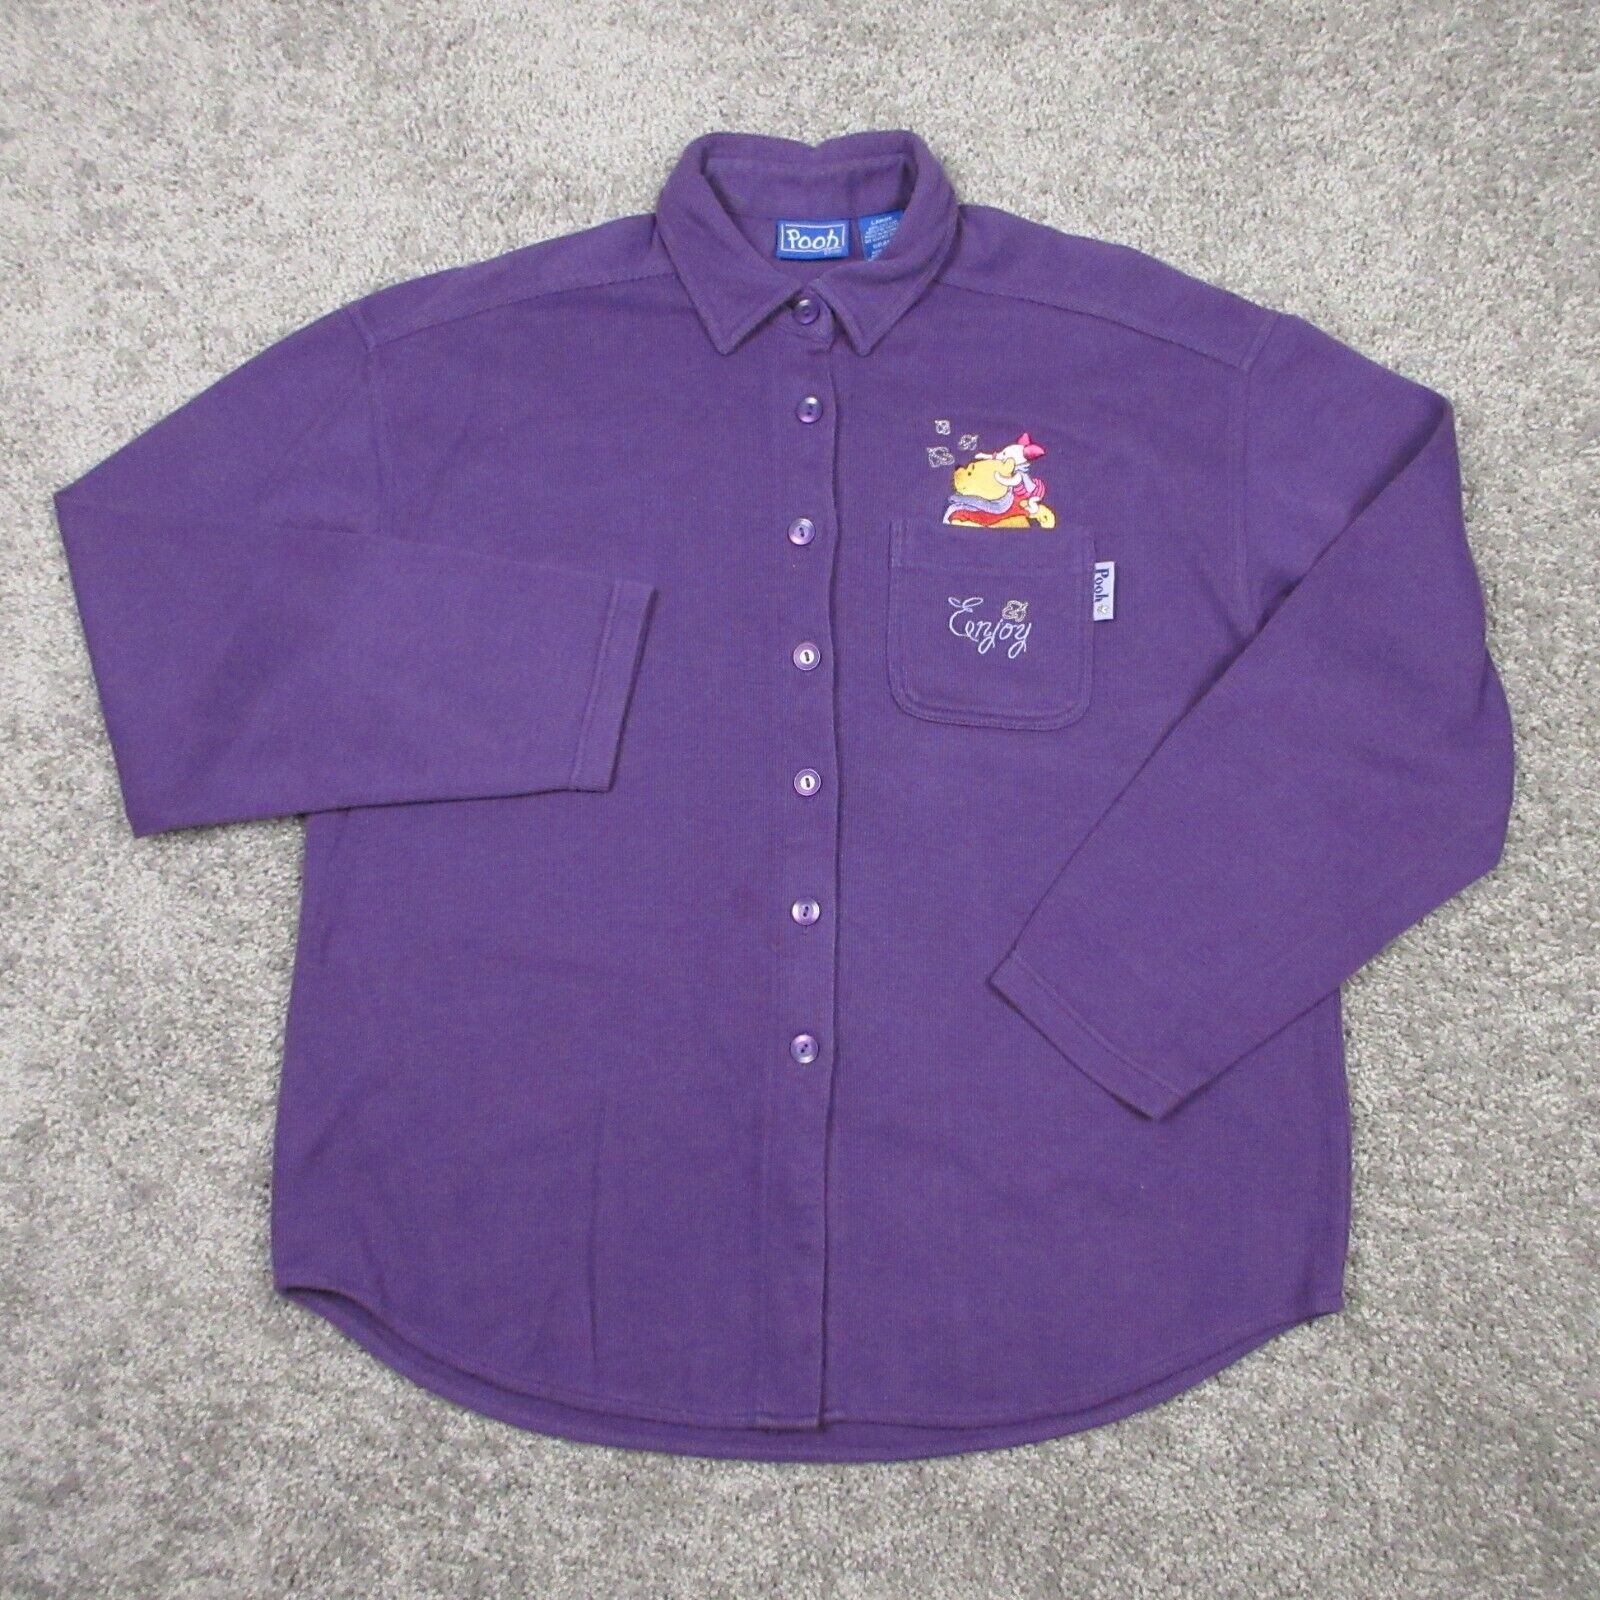 Vintage Winnie The Pooh Shirt Adult Large Purple Embroidered Button Up Piglet